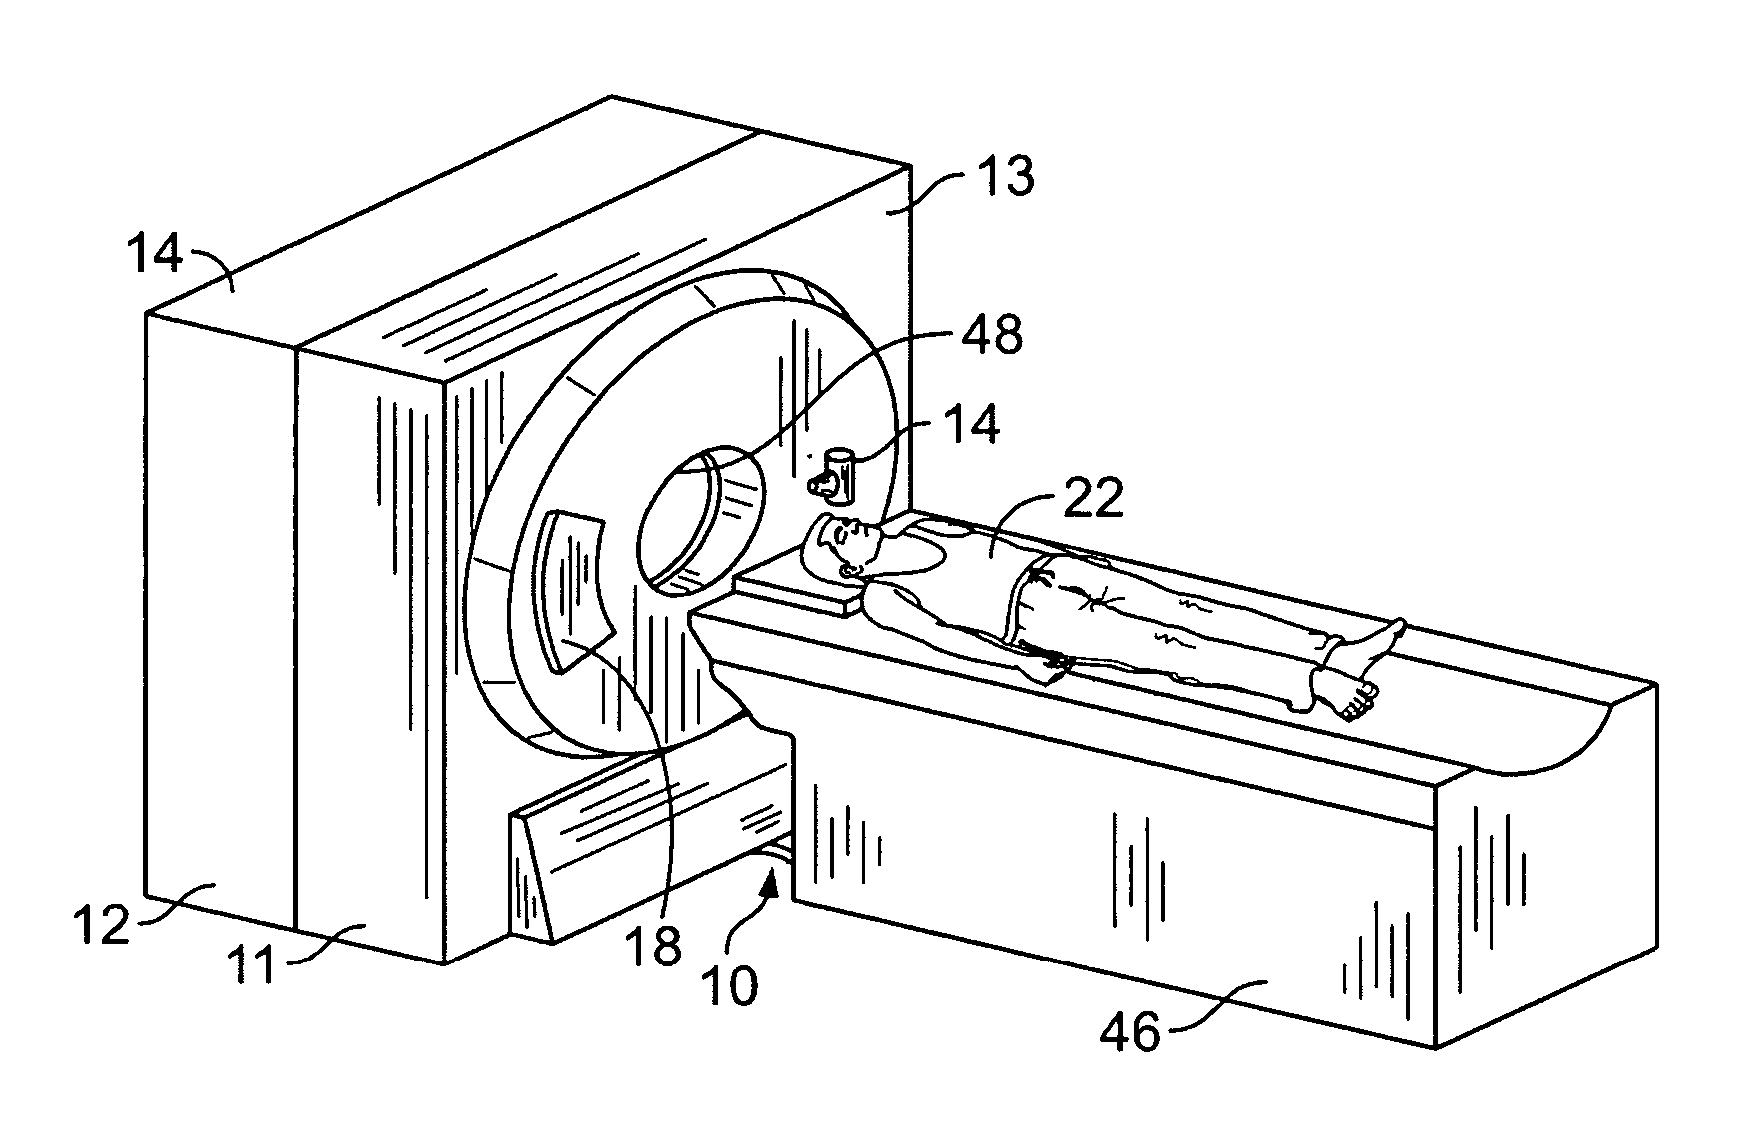 Multi modality imaging methods and apparatus